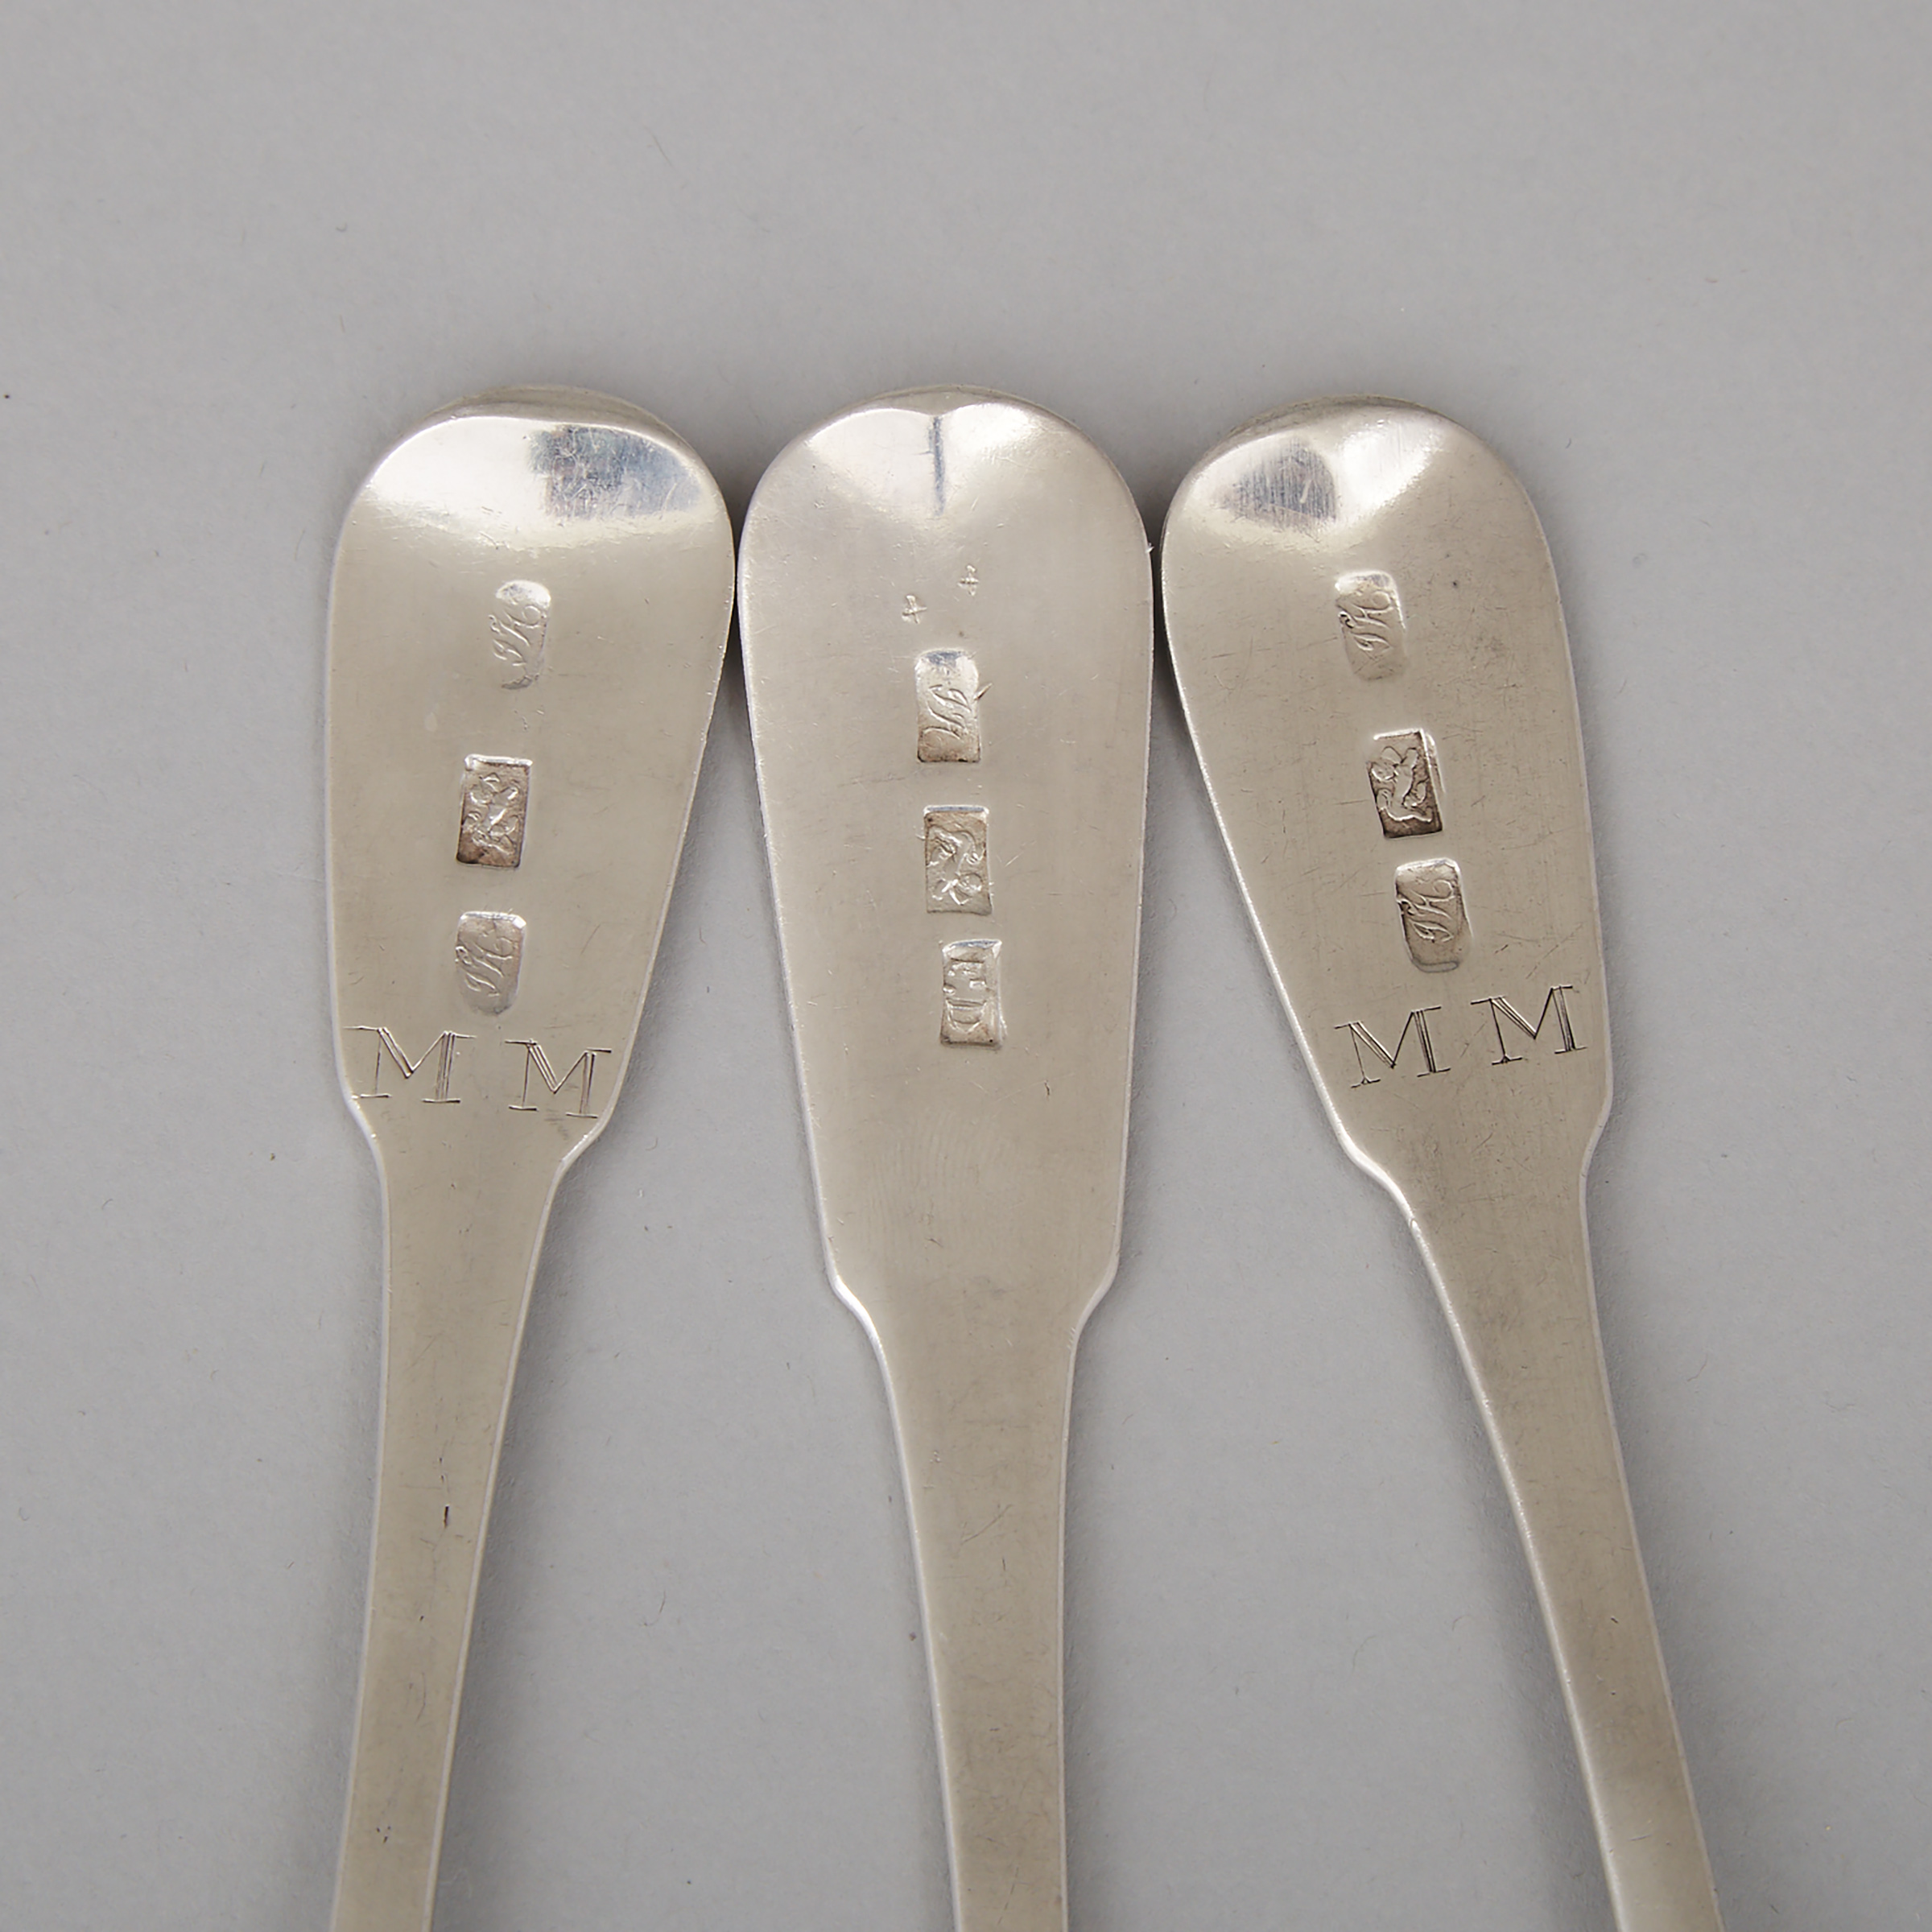 Three Canadian Silver Fiddle Pattern Table Spoons, James Hanna and Hanna & Delagrave, Quebec City, Que., early 19th century